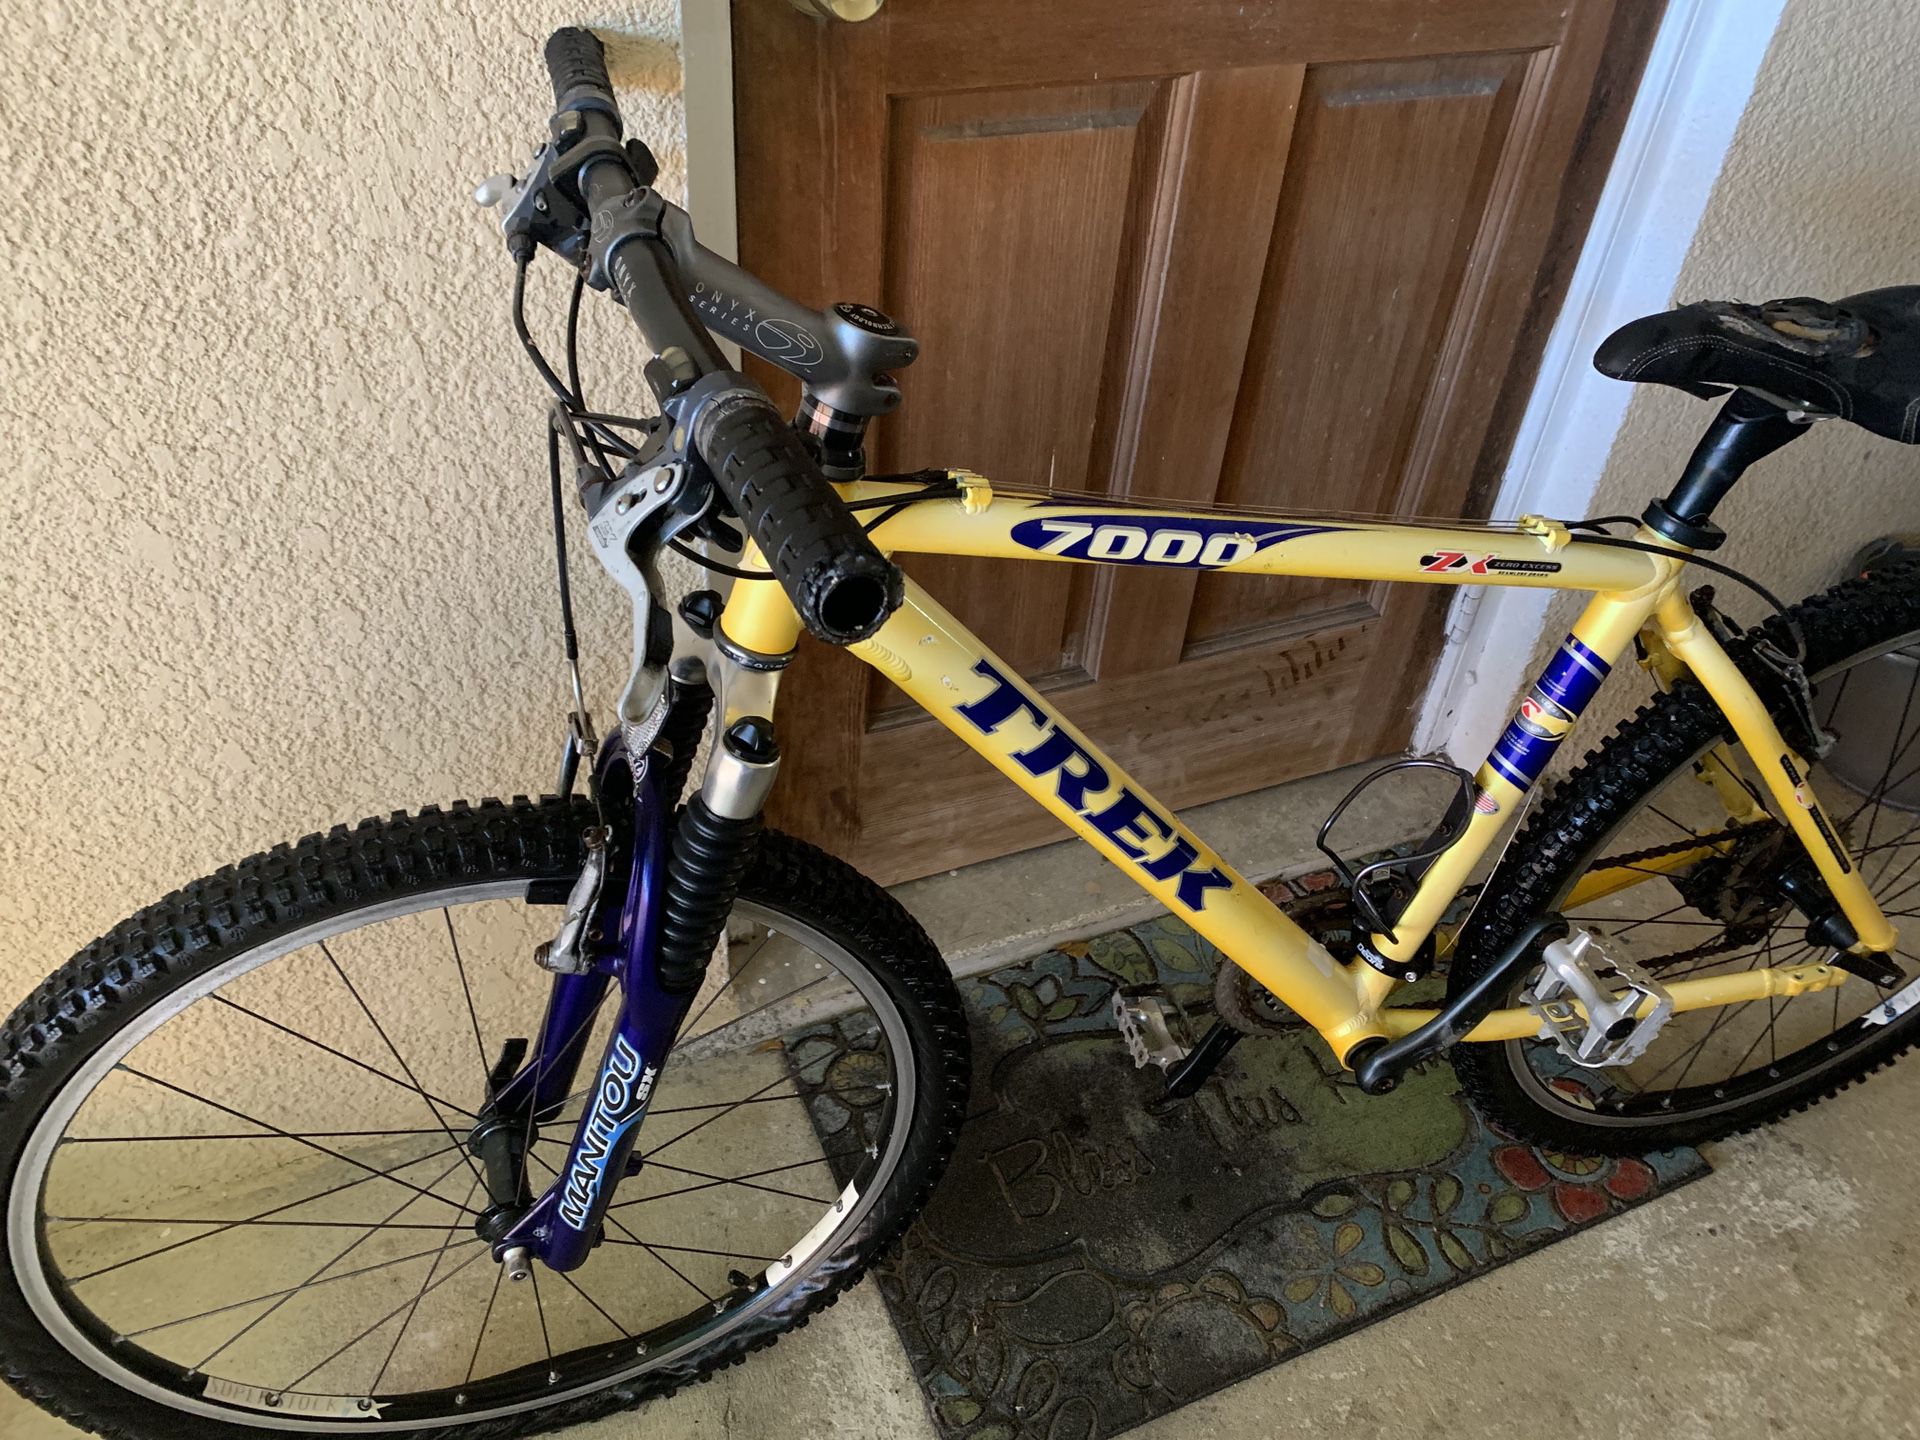 Trek mountain bike, you need to change the seat and the handles and put air in the tires?